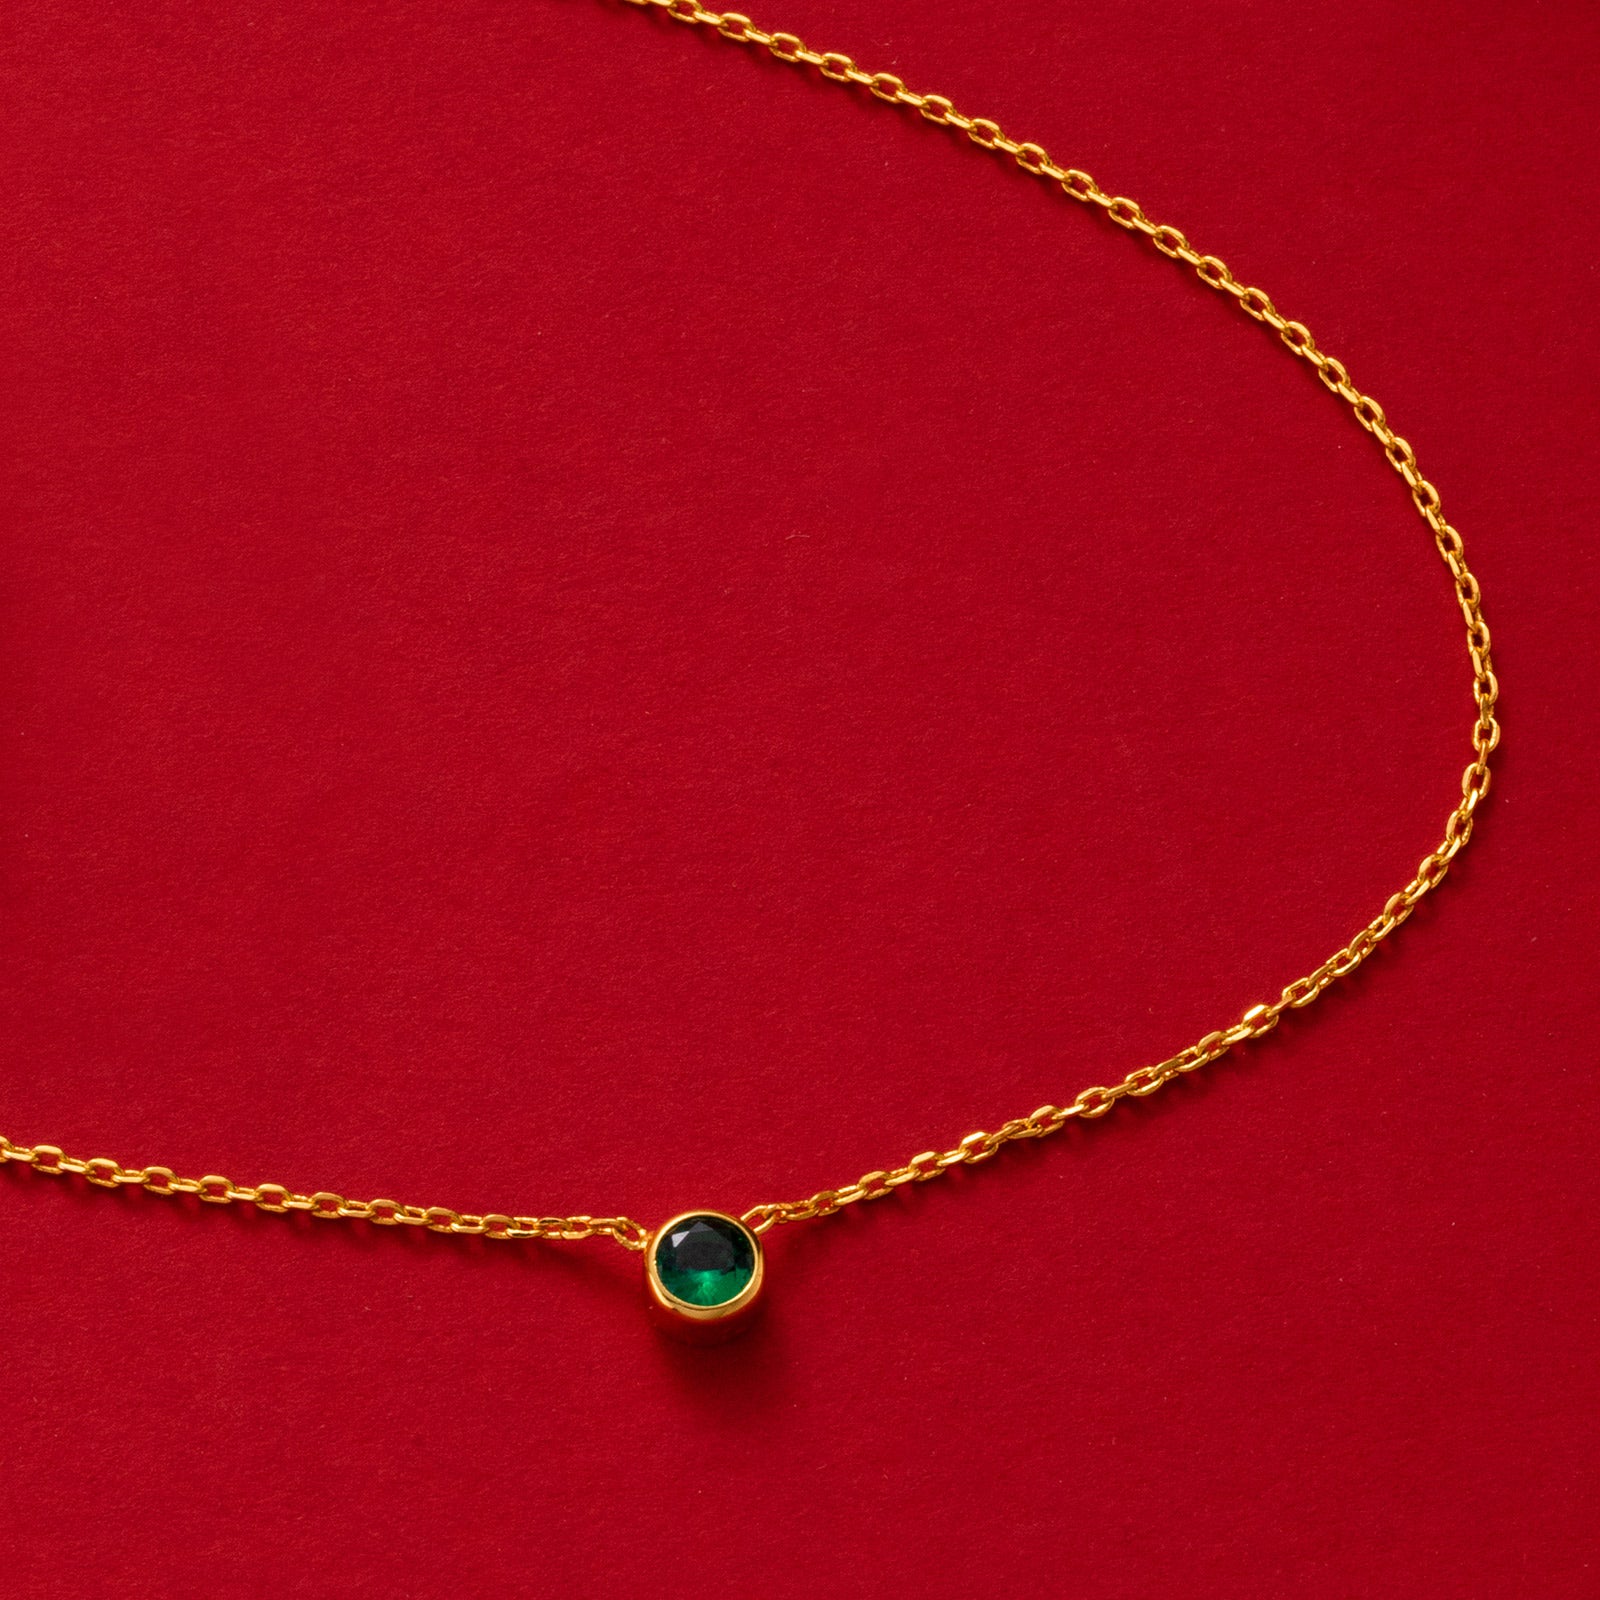 Gold Emerald Crystal Pendant Necklace, symbolizing timeless emerald sparkle, this necklace features a dazzling crystal pendant in a radiant green shade